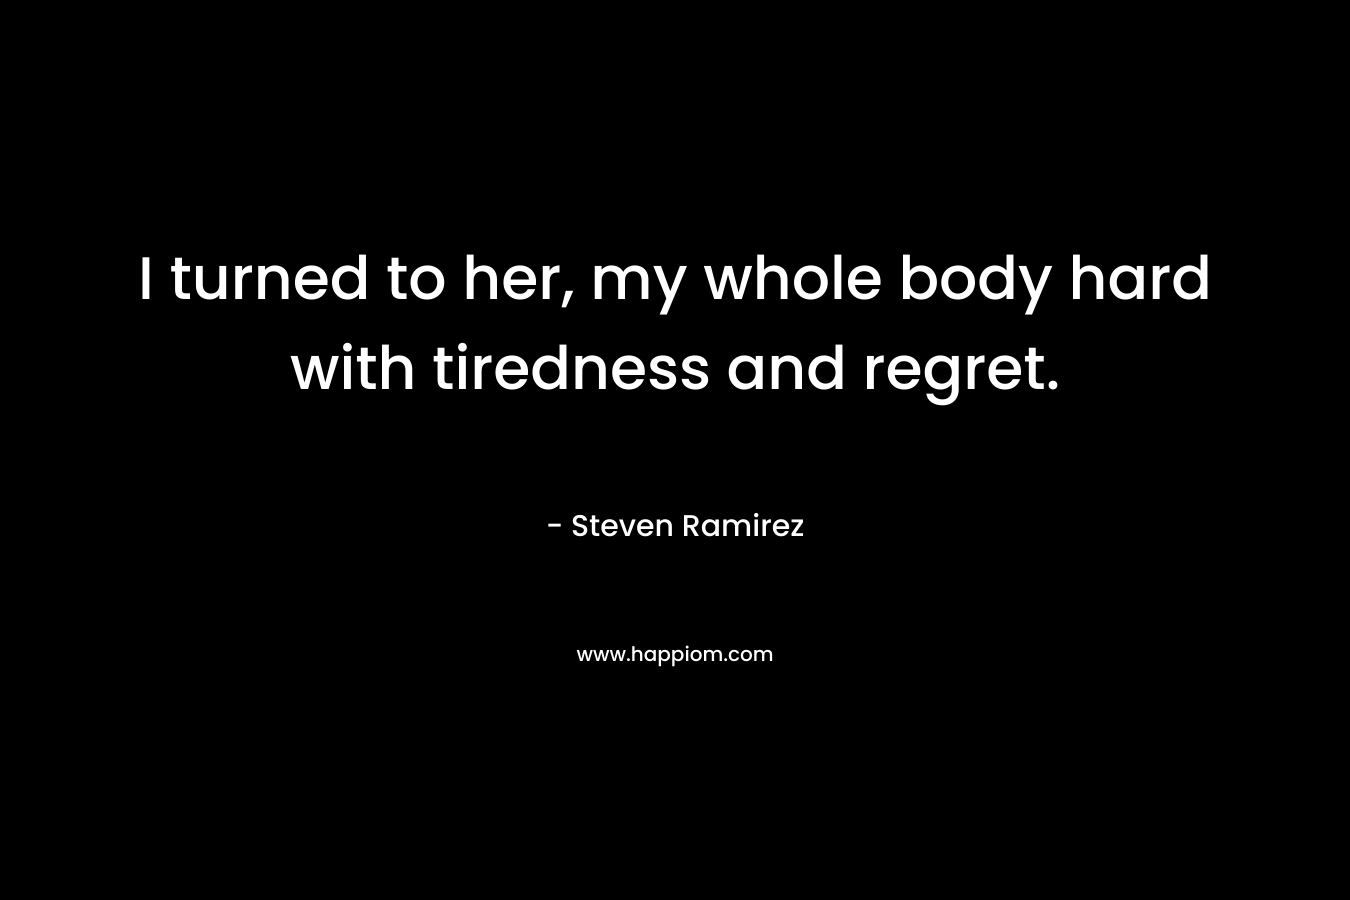 I turned to her, my whole body hard with tiredness and regret. – Steven Ramirez